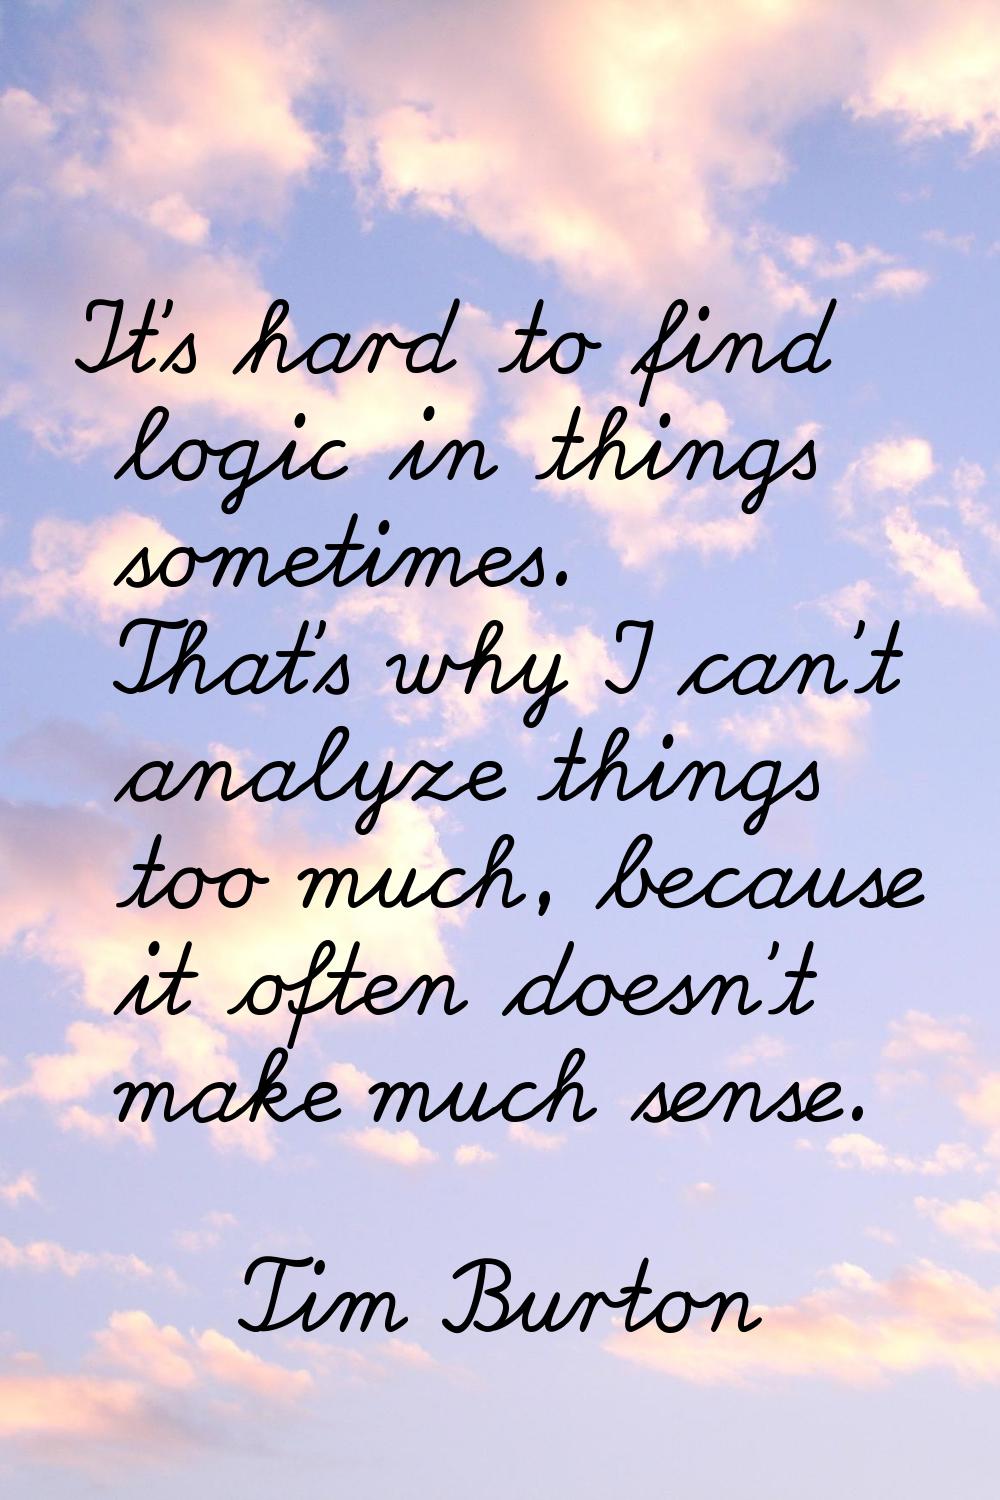 It's hard to find logic in things sometimes. That's why I can't analyze things too much, because it